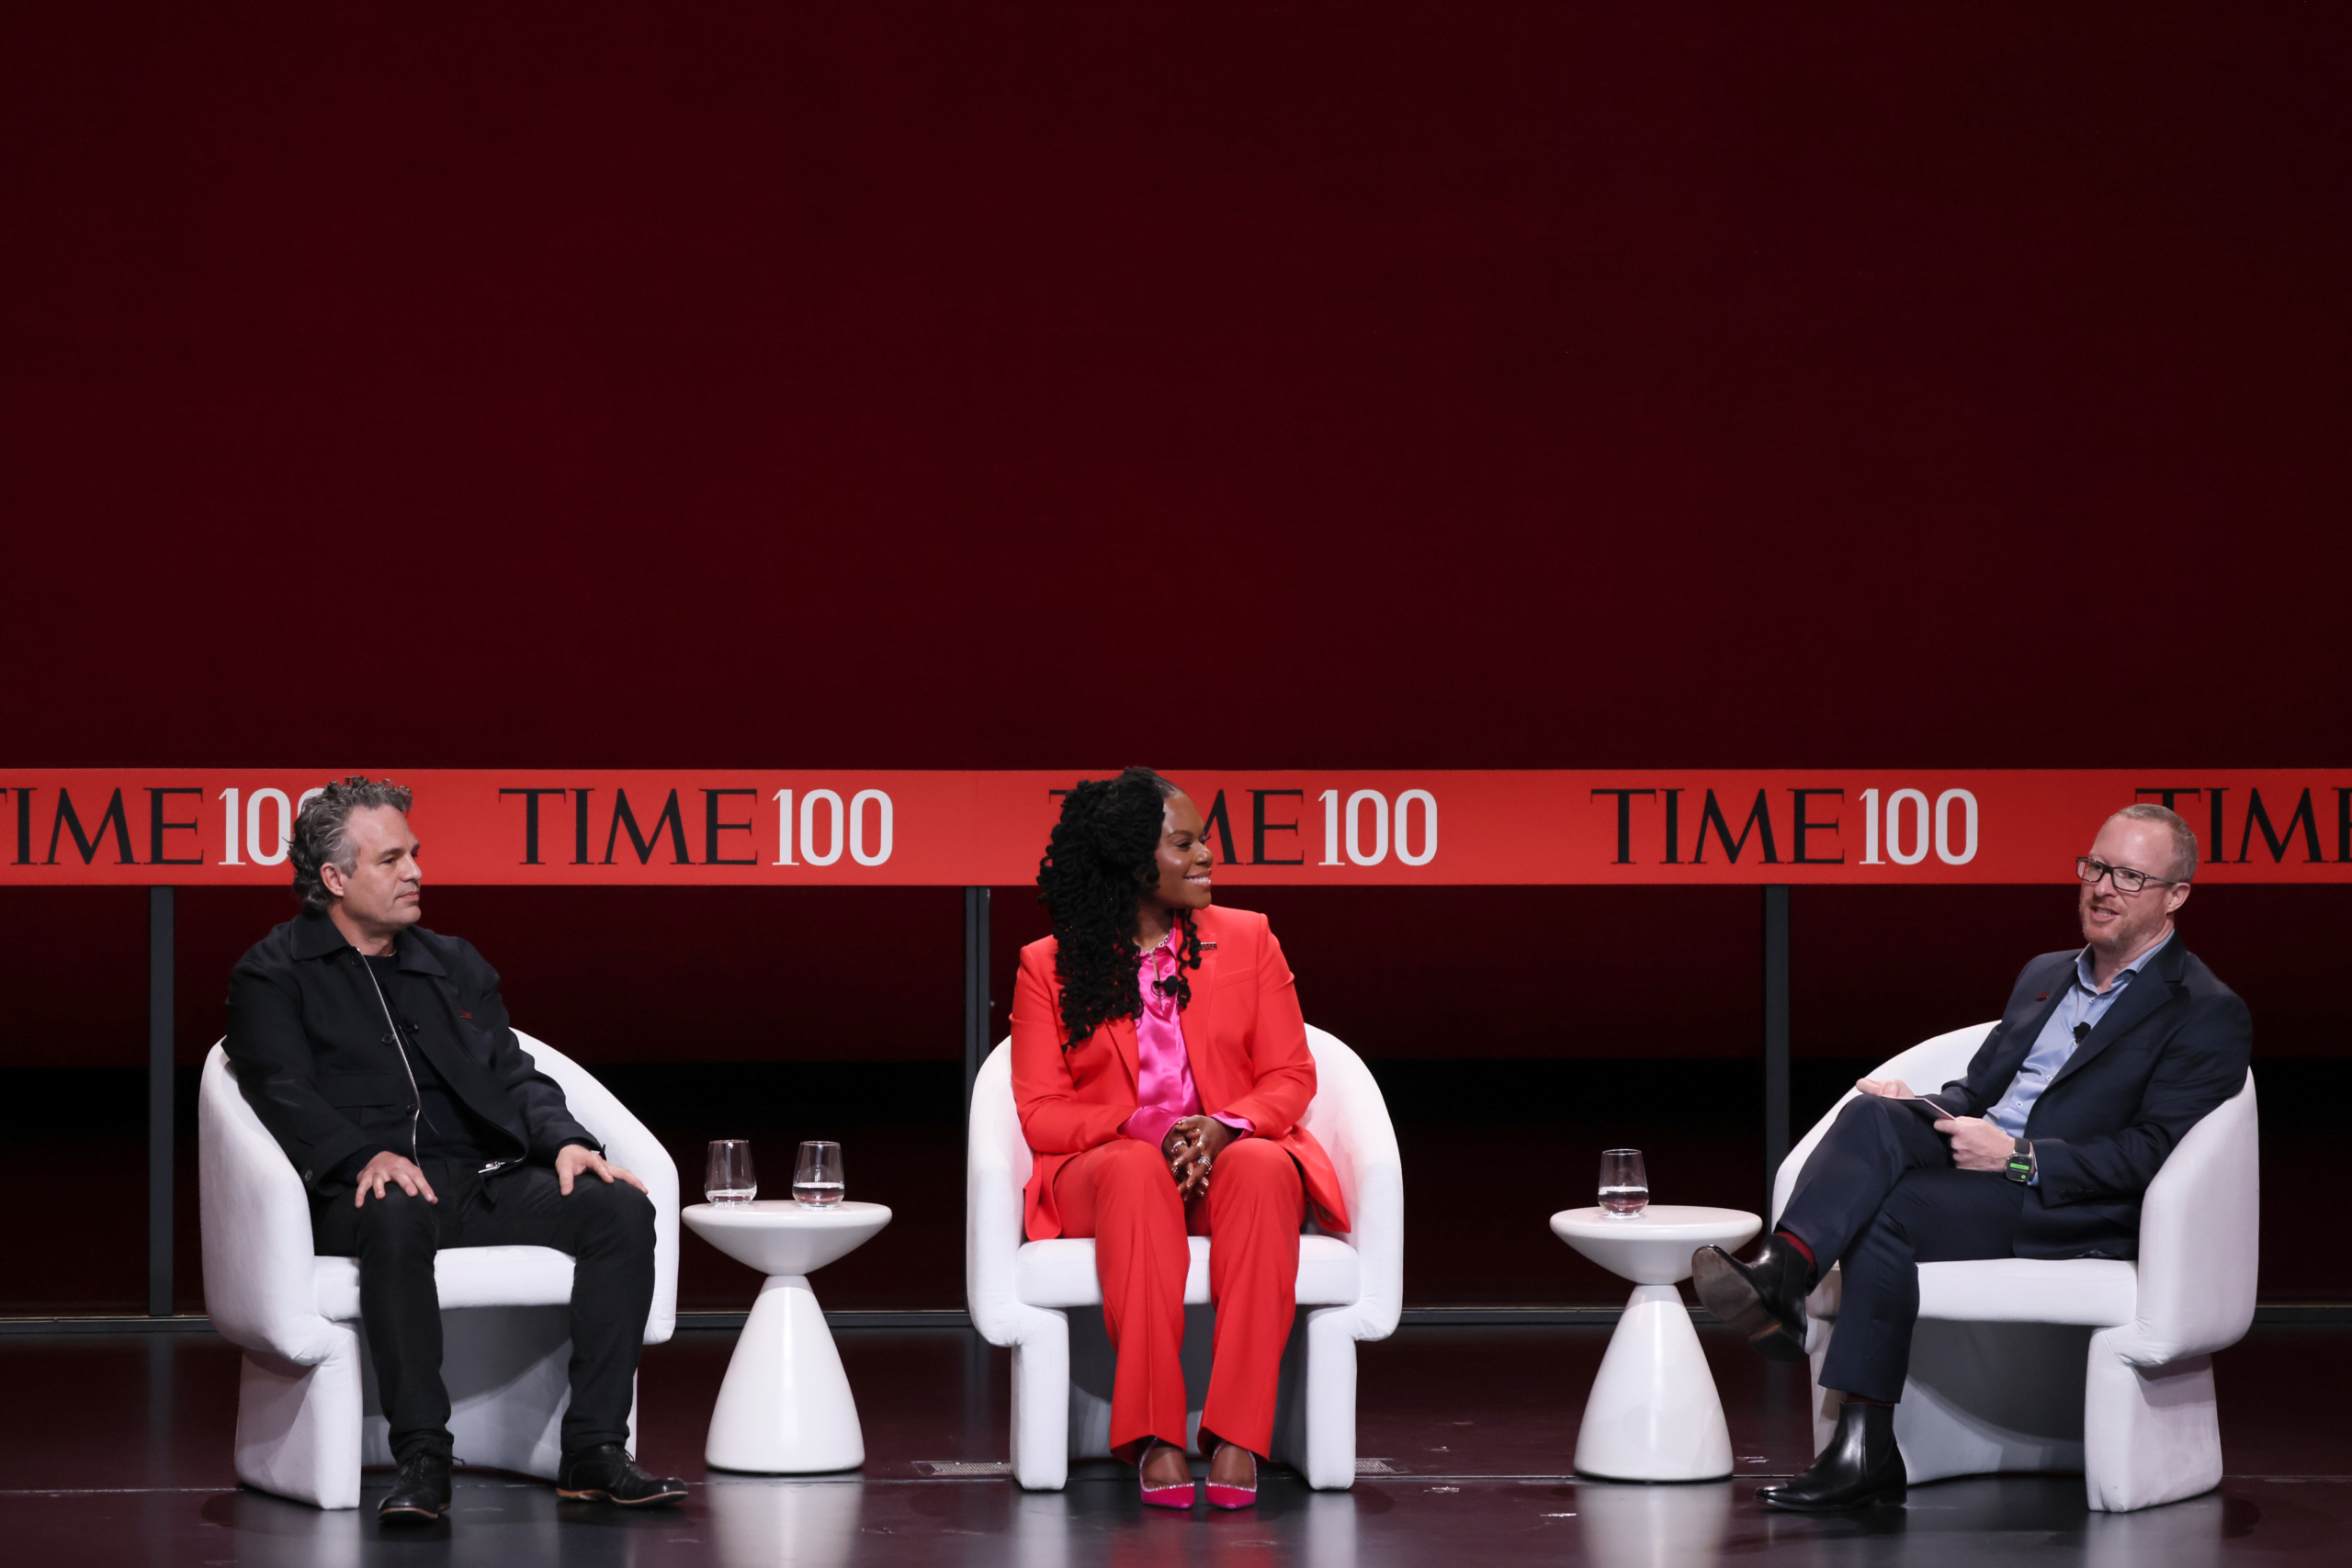 NEW YORK, NEW YORK - APRIL 25: Mark Ruffalo, Gloria Walton and Simon Mulcahy speak onstage at the 2023 TIME100 Summit at Jazz at Lincoln Center on April 25, 2023 in New York City. (Photo by Jemal Countess/Getty Images for TIME)